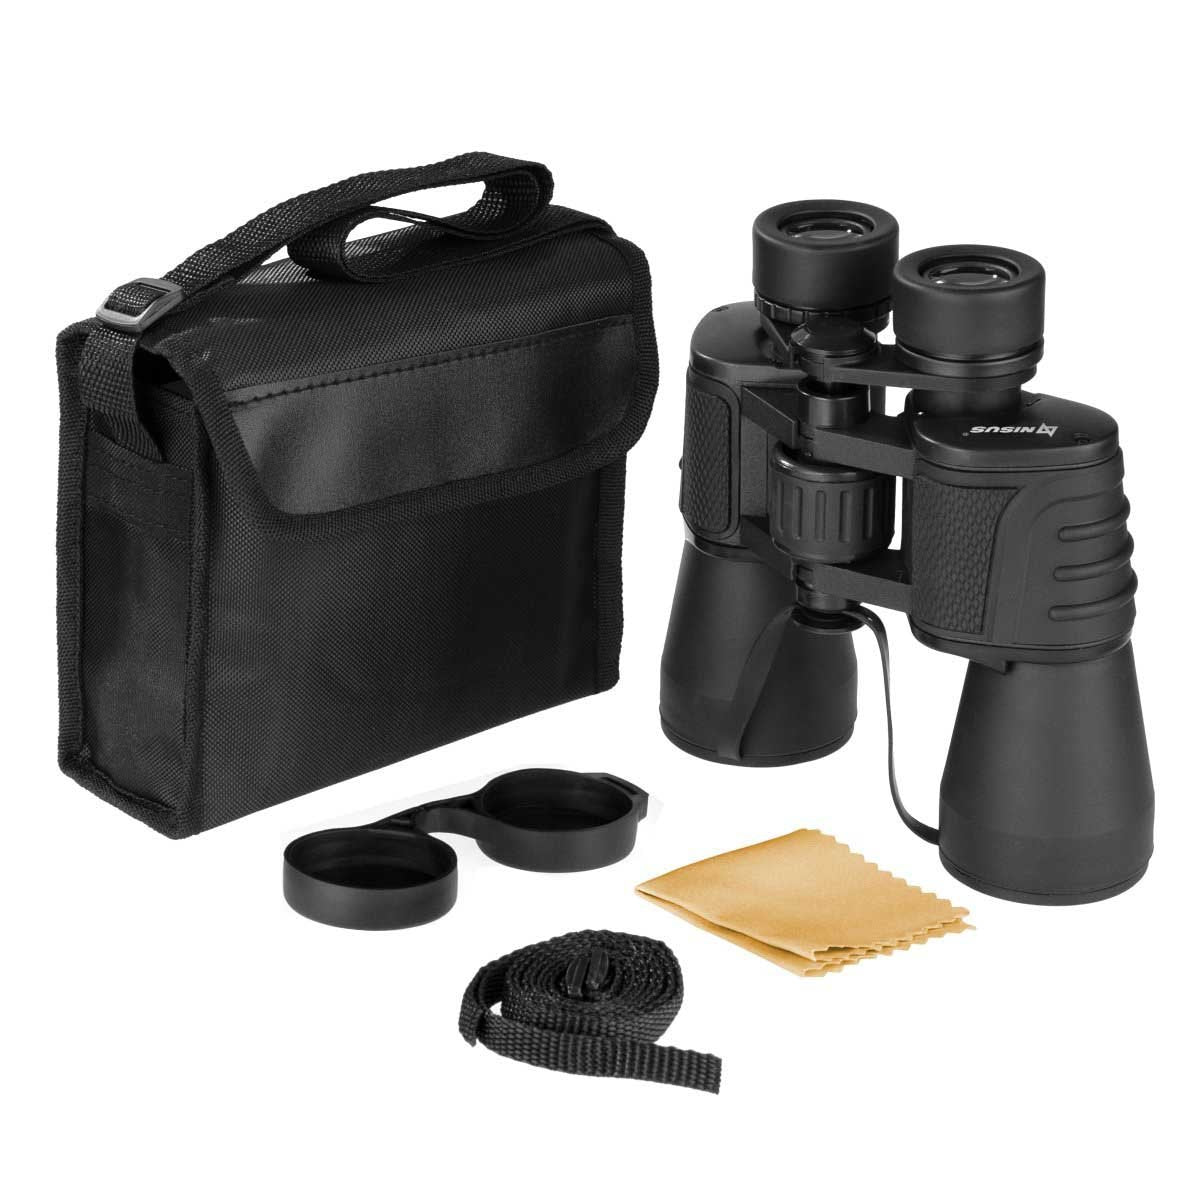 10x50 Multifunctional Camping Black Binocular with a Travel Case